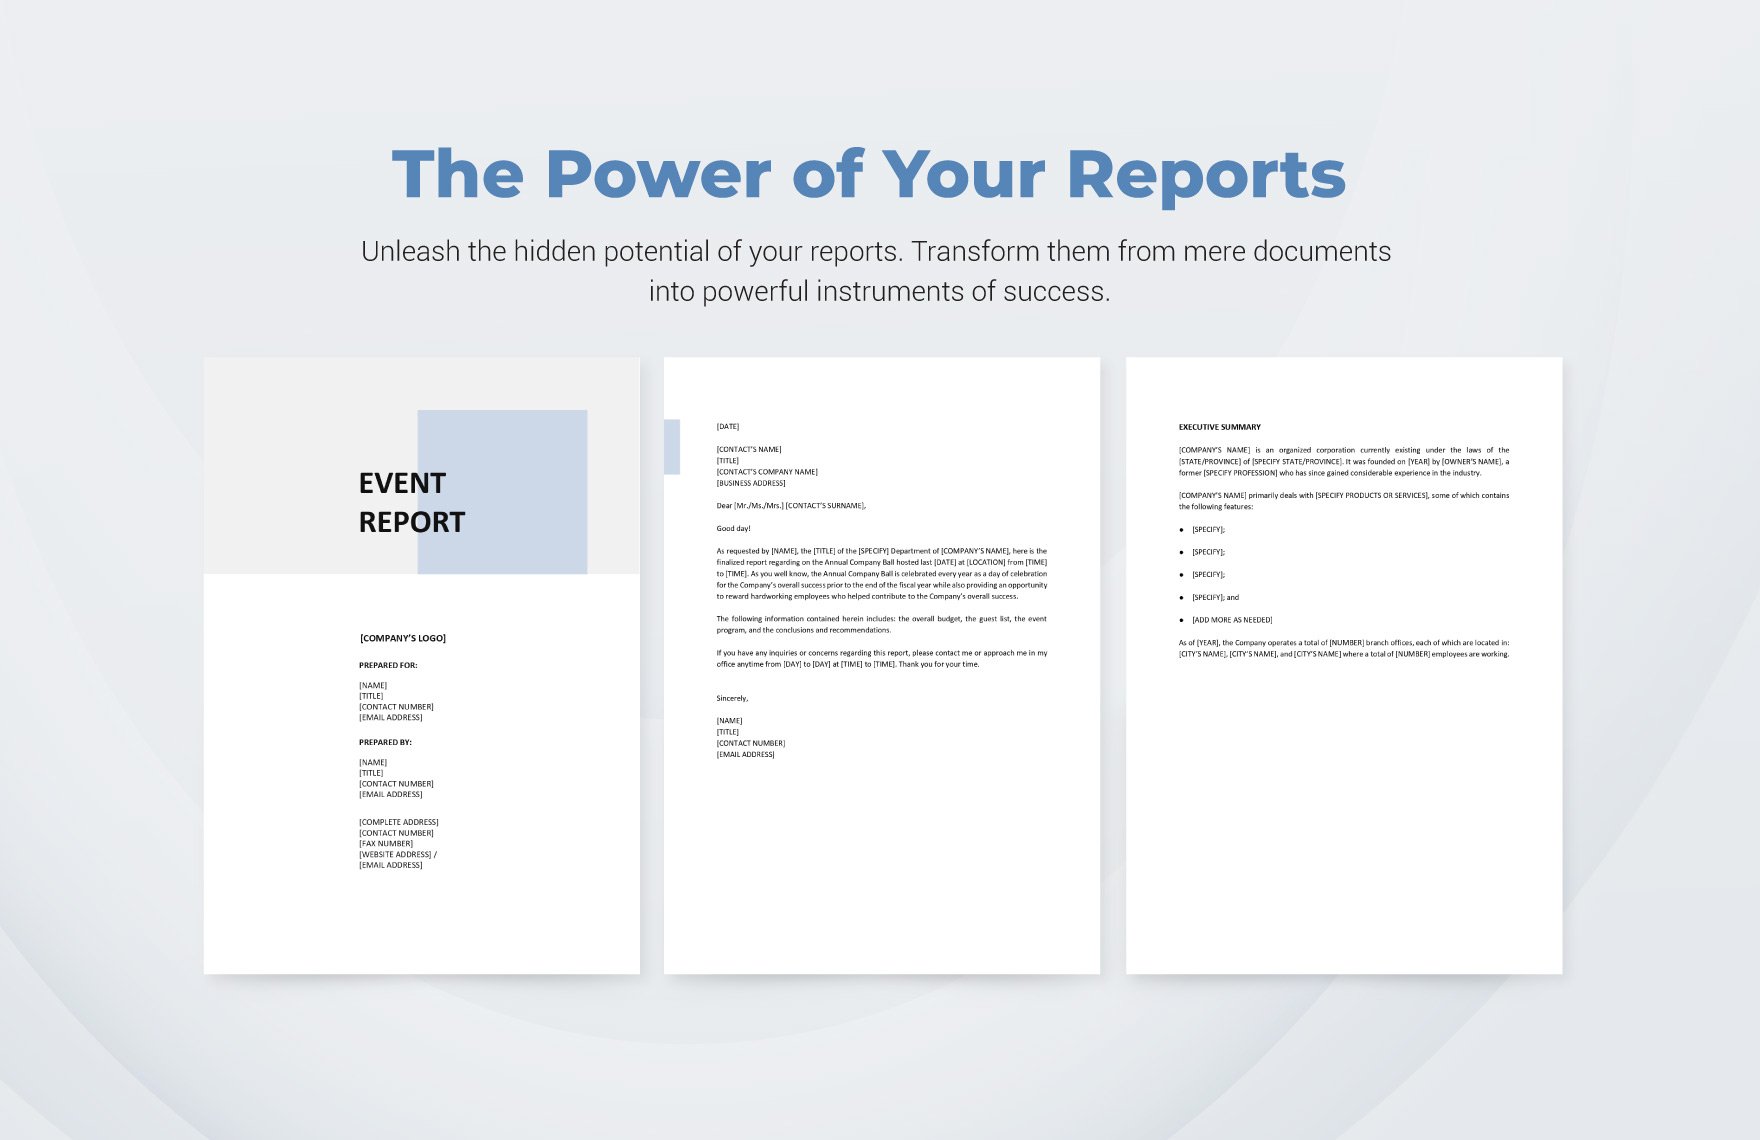 Event Report Template